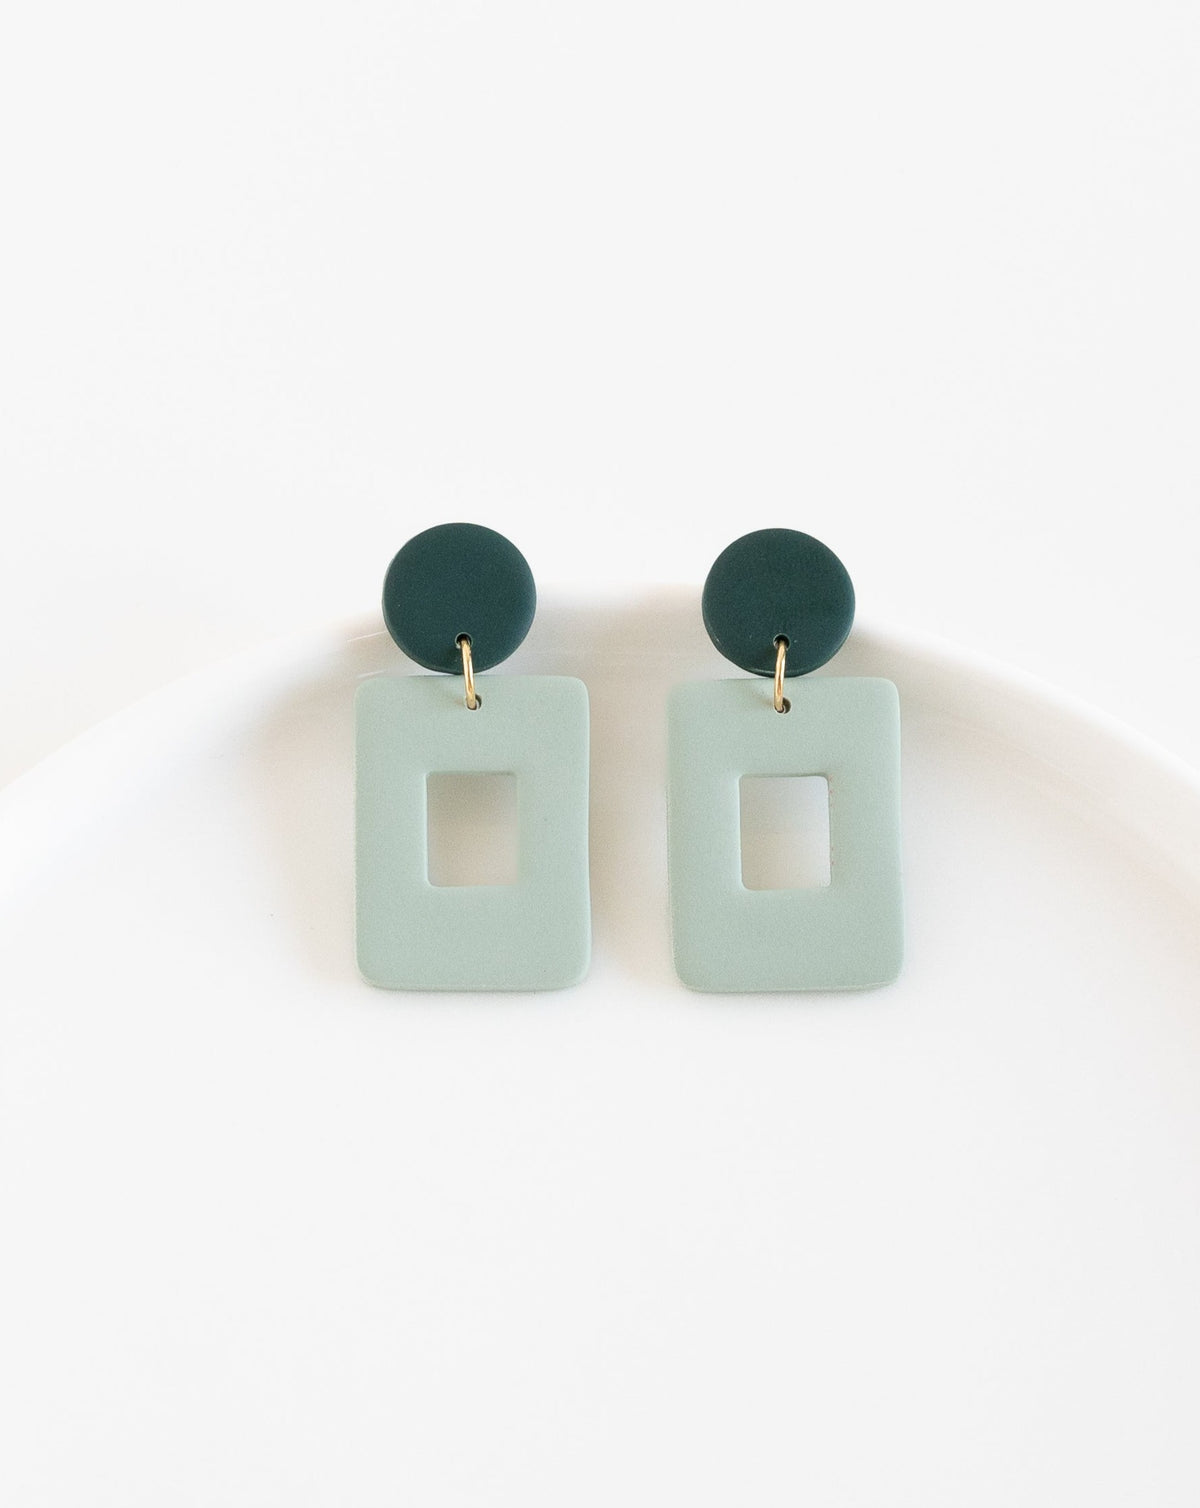 close-up of Muna earrings in sage color.